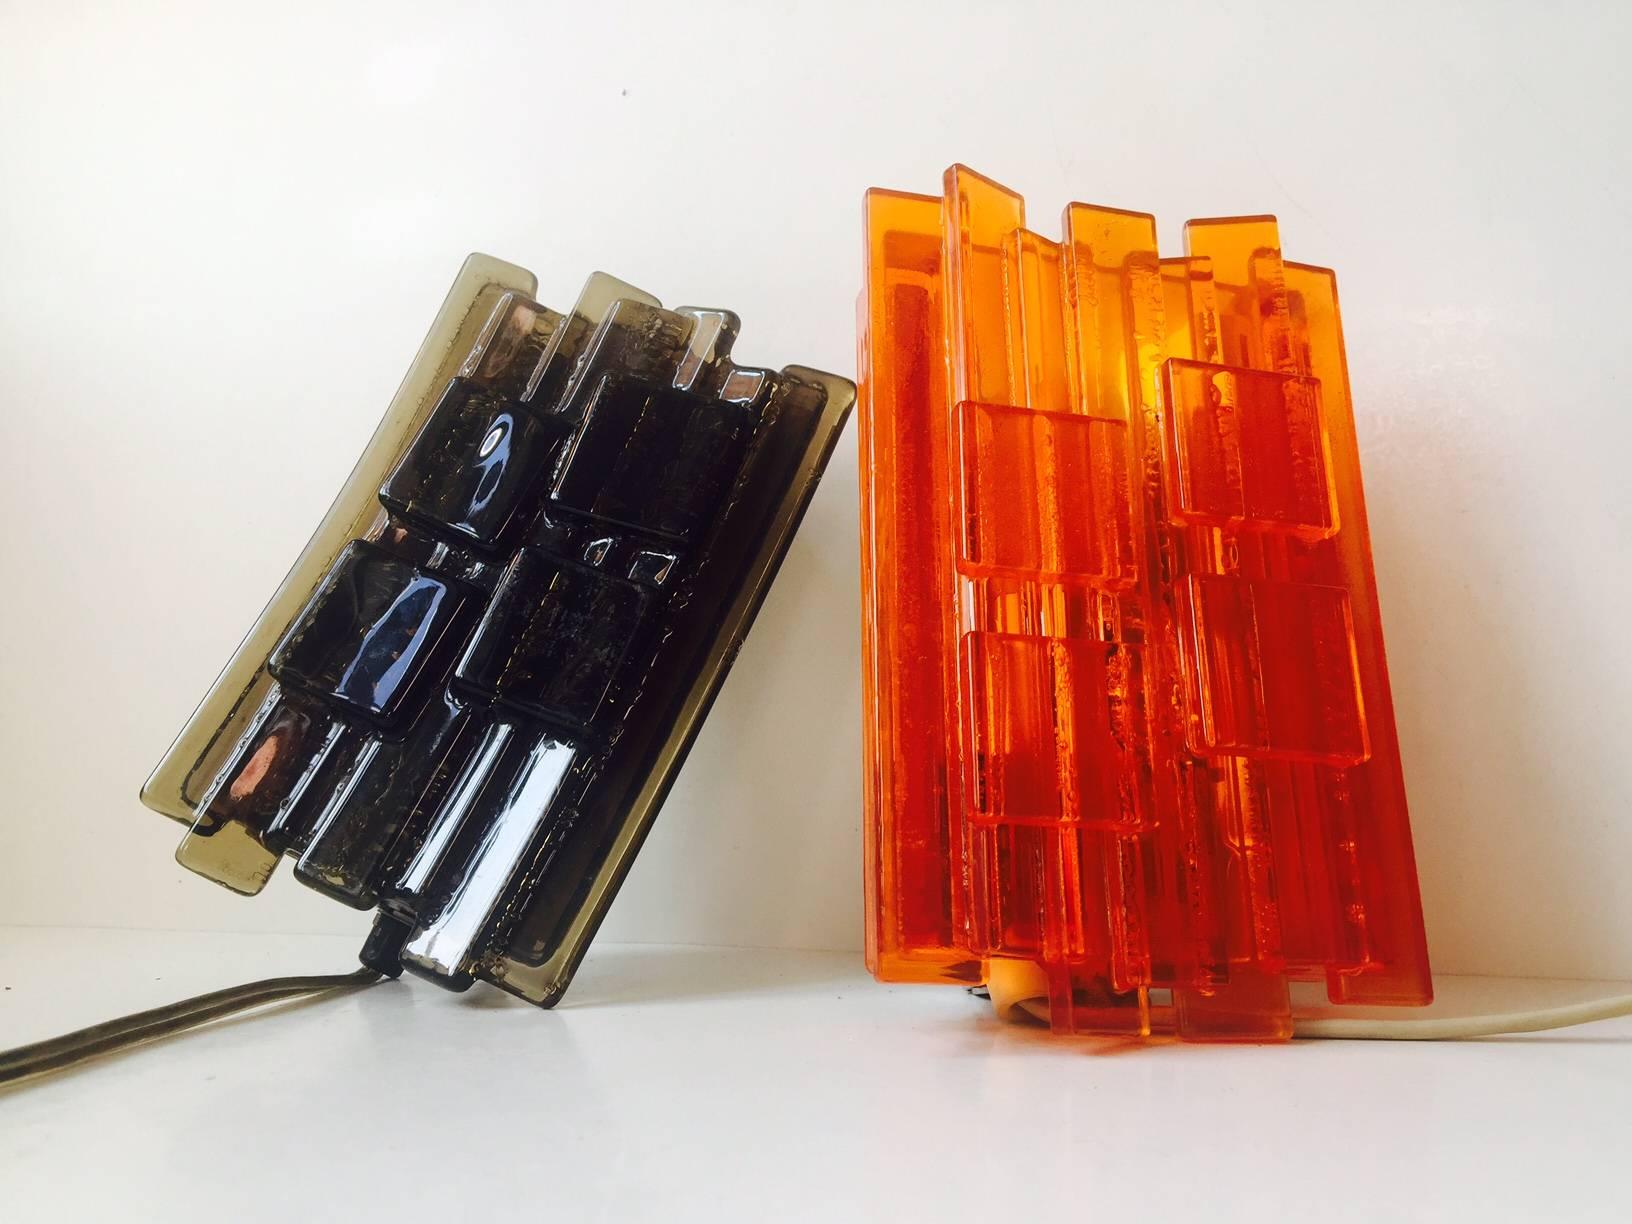 Danish Set of Brutalist Acrylic Sconces by Claus Bolby for Cebo, Denmark, 1970s